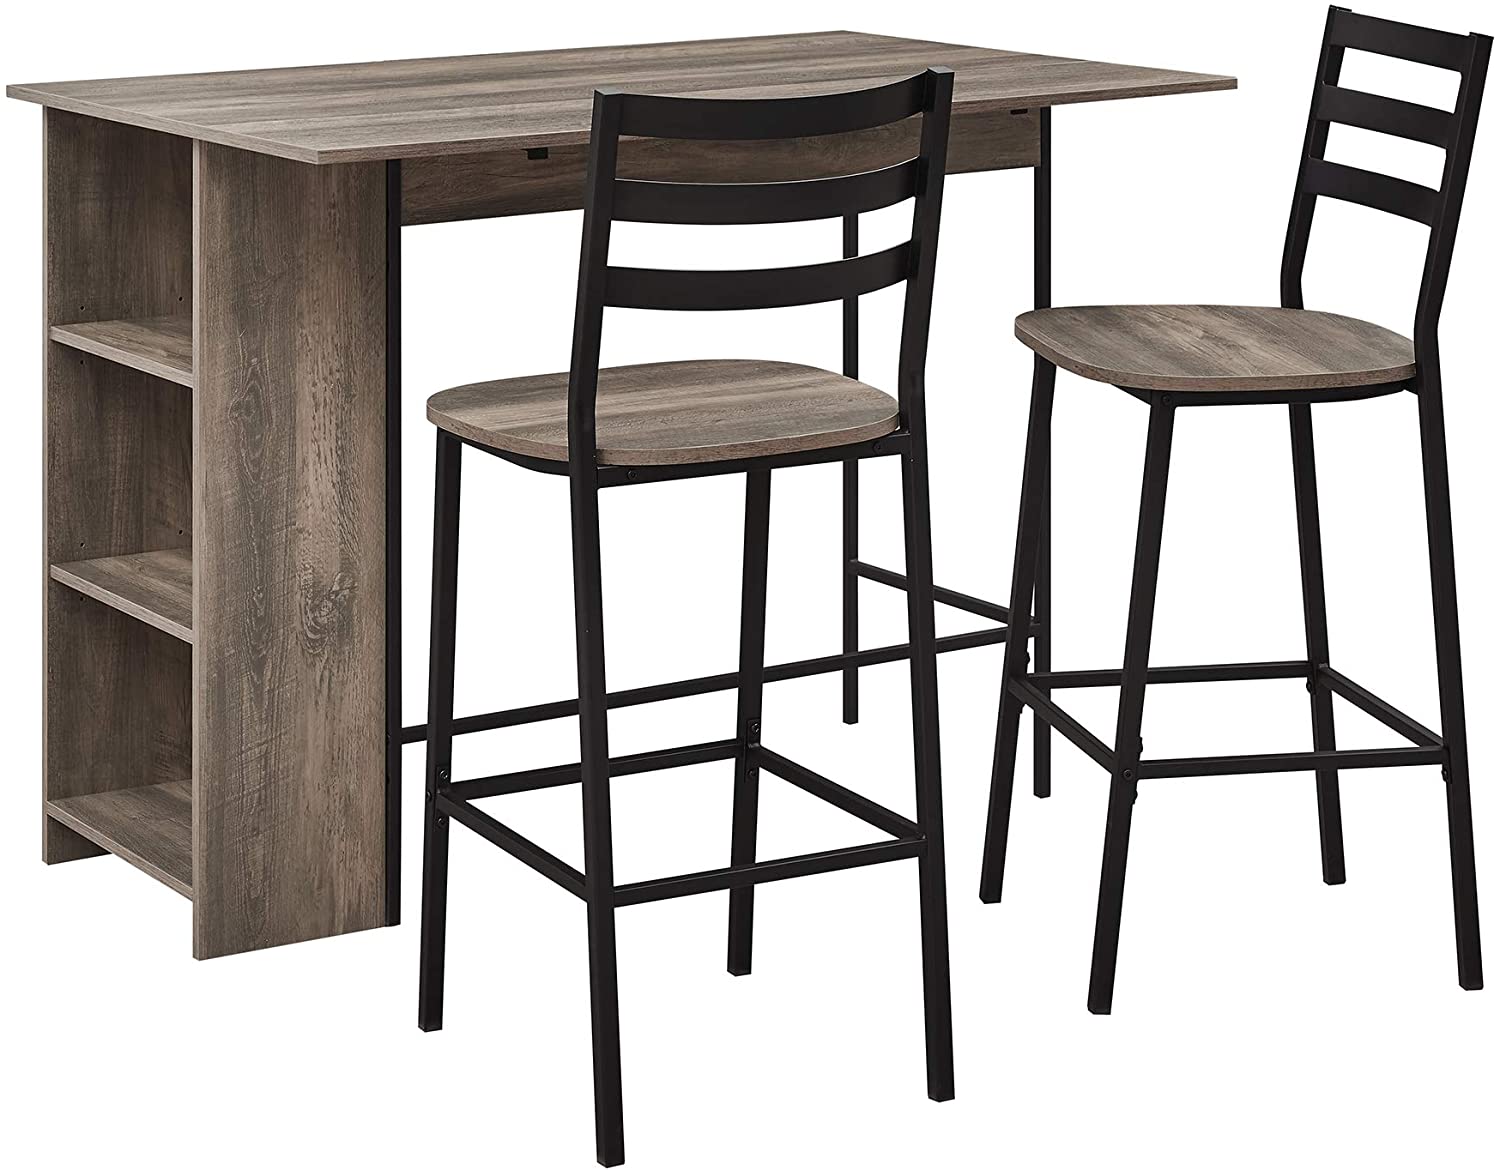 Industrial Height Bar 3-piece Table Chair Set For Small Space With Storage